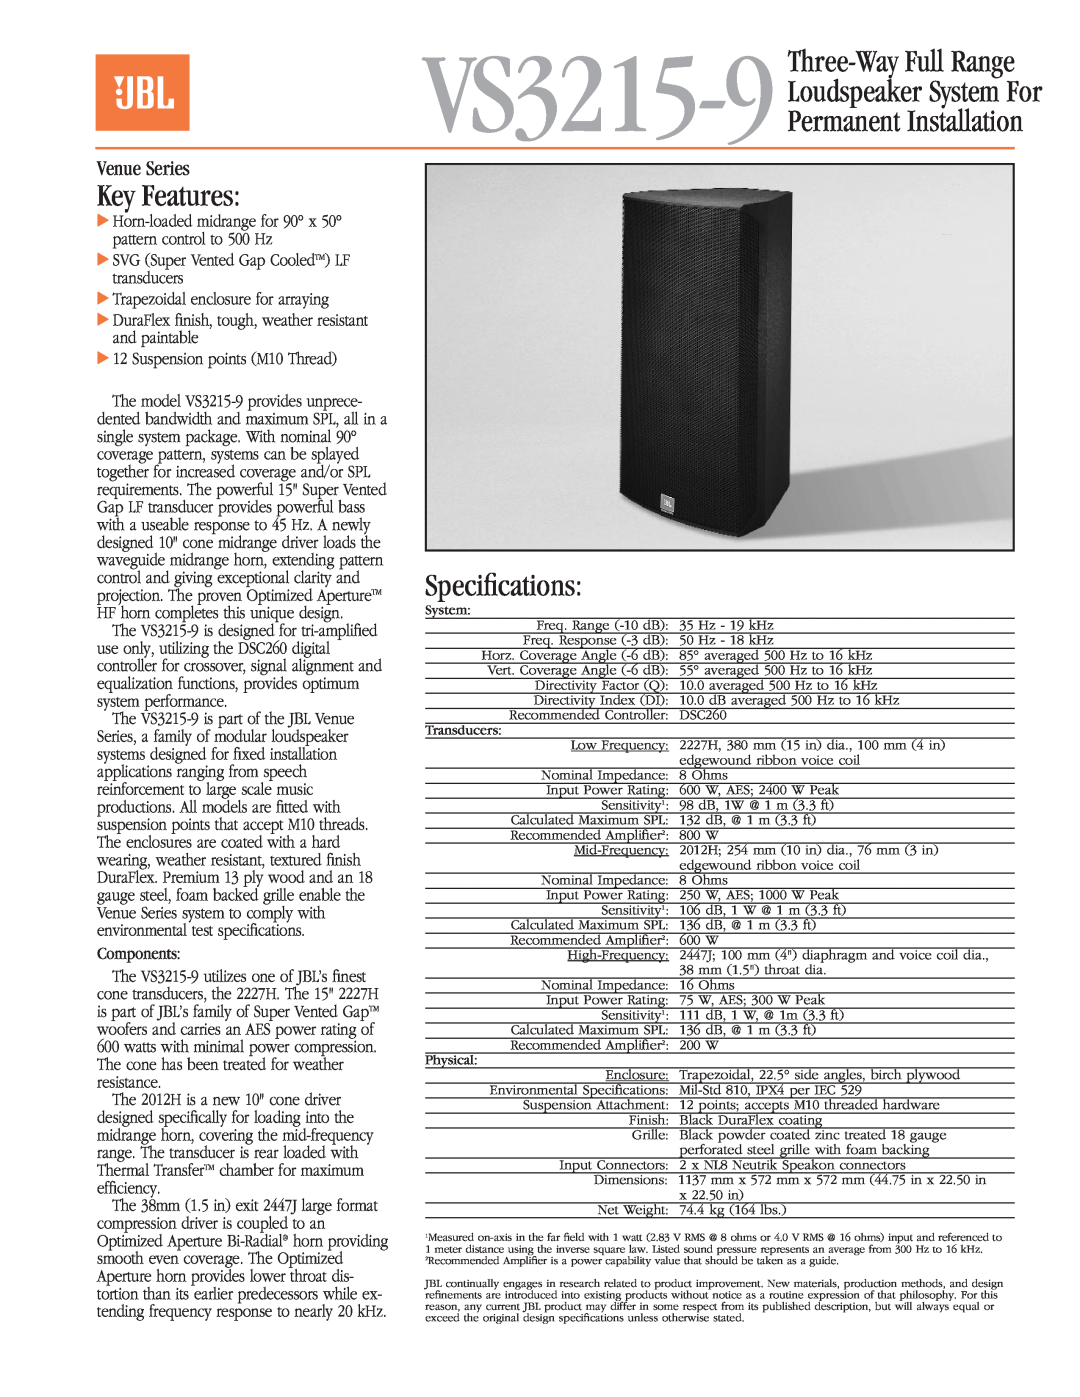 JBL VS3215-9 specifications Loudspeaker System For Permanent Installation, Key Features, Speciﬁcations, Venue Series 